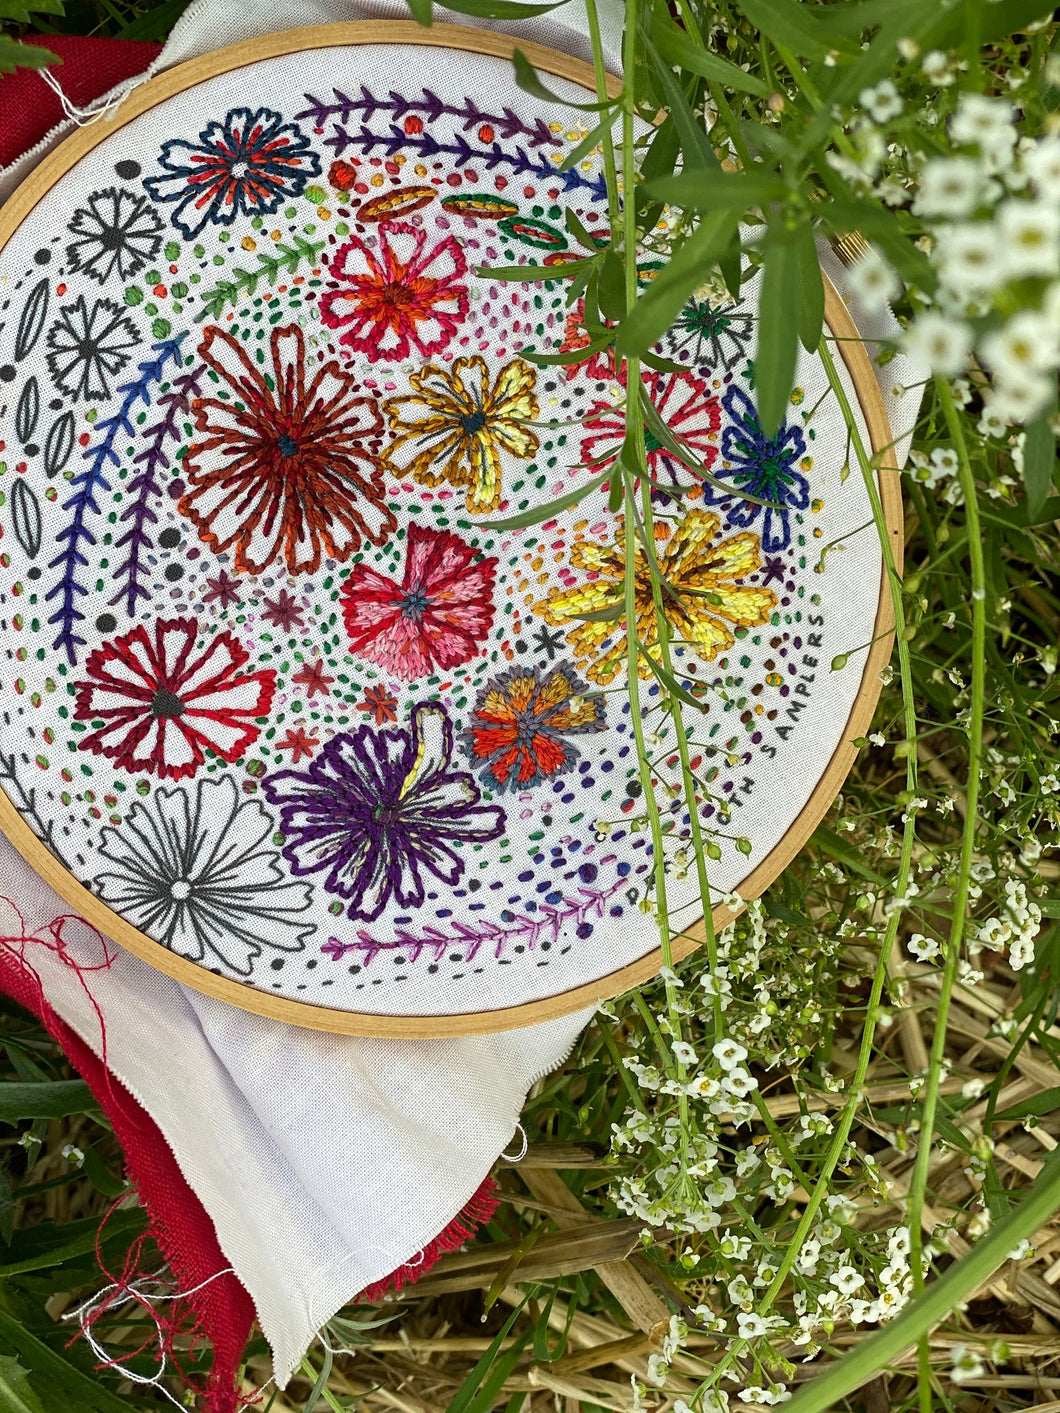 An embroidery pattern of varying flowers and multi-colored stitches.